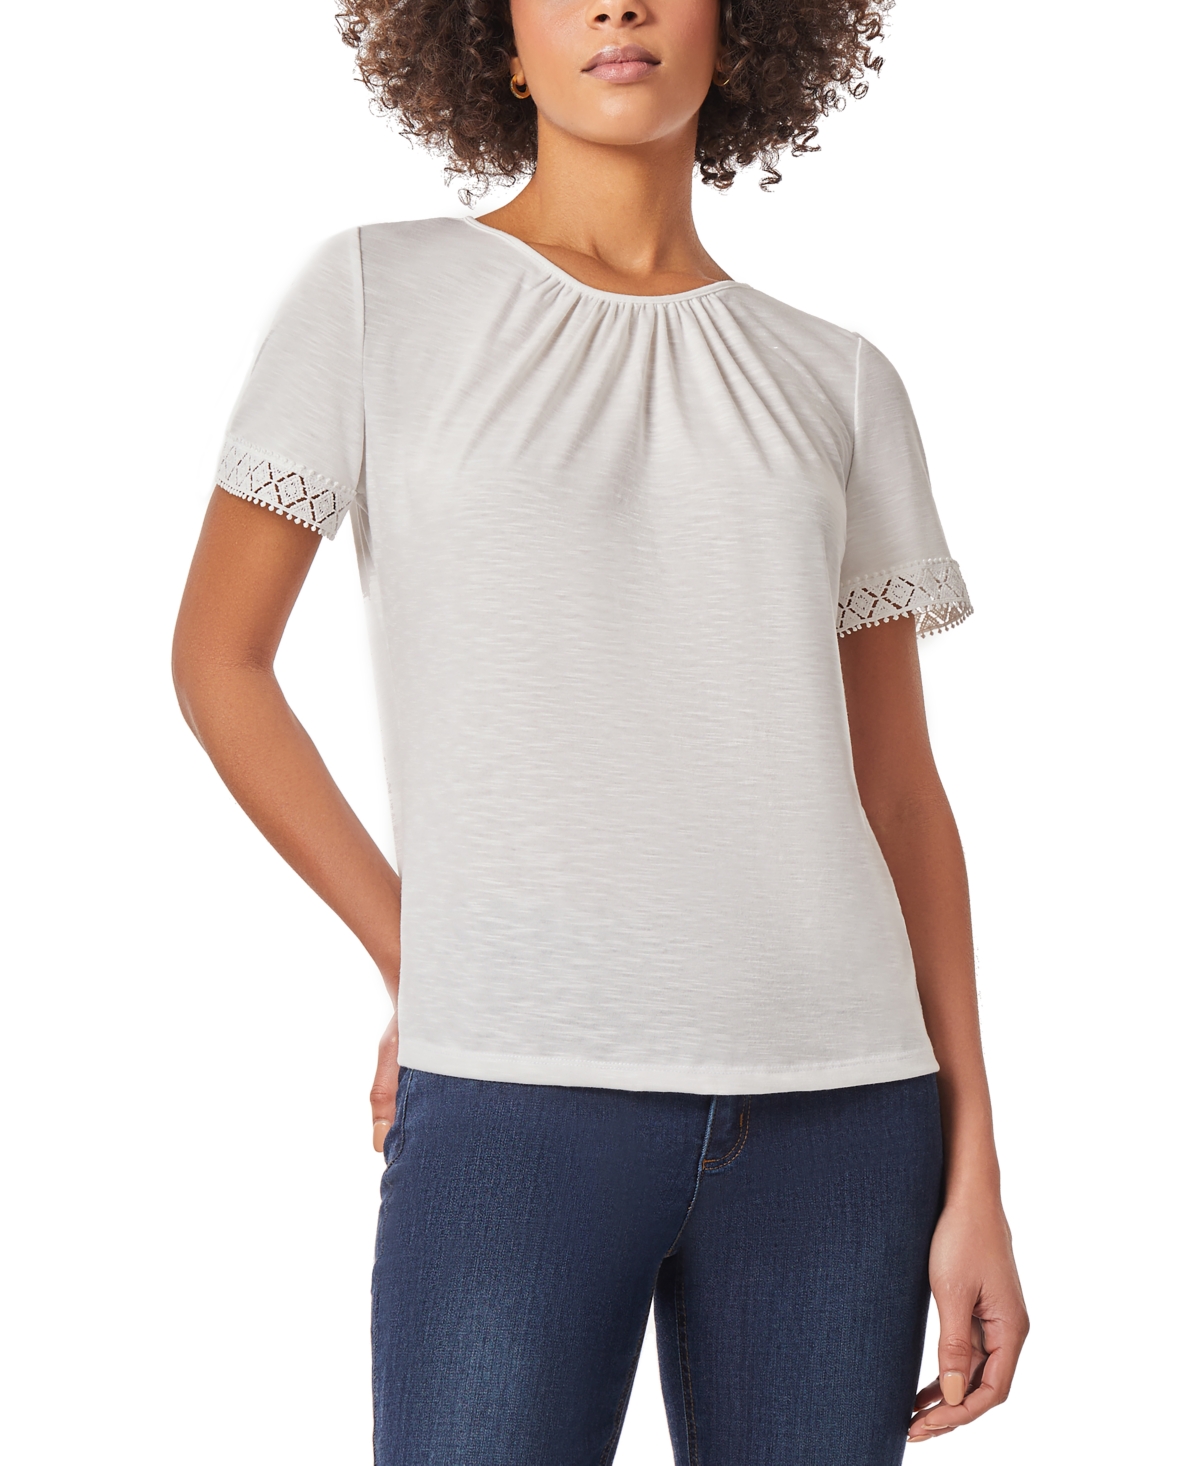 Petite Drapey Textured Lace-Trim Top - NYC White